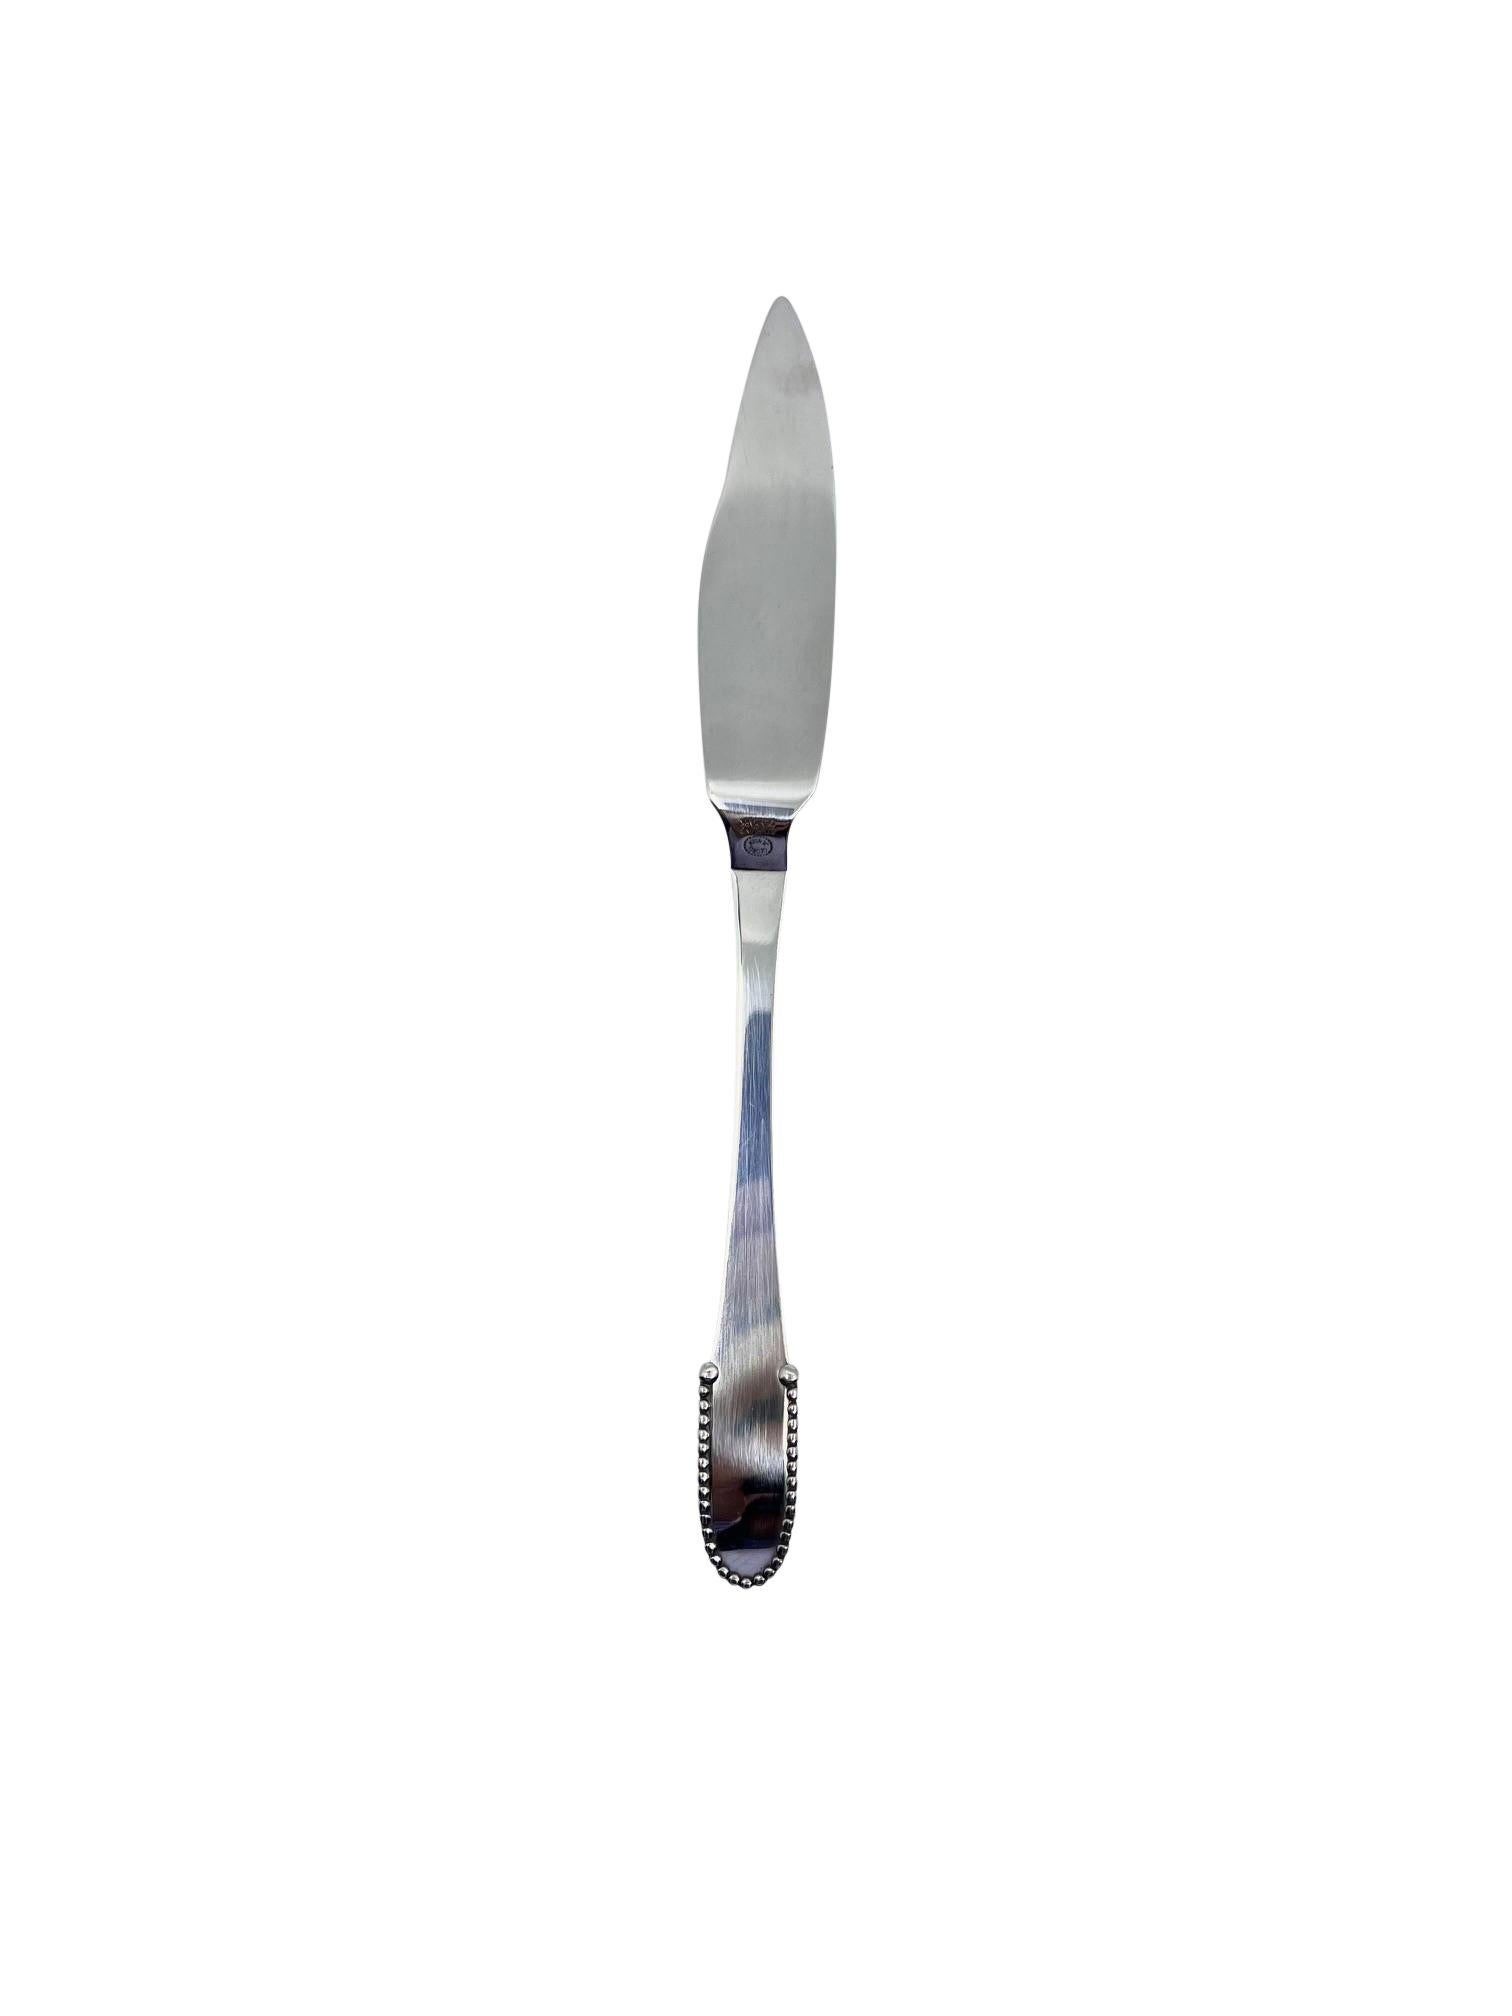 A Georg Jensen sterling silver fish knife in the beaded pattern, designed in 1916 by Georg Jensen.

Additional information:
Material: Sterling silver
Styles: Art Nouveau
Hallmarks: Georg Jensen sterling Denmark
Dimensions:  8 1/4″